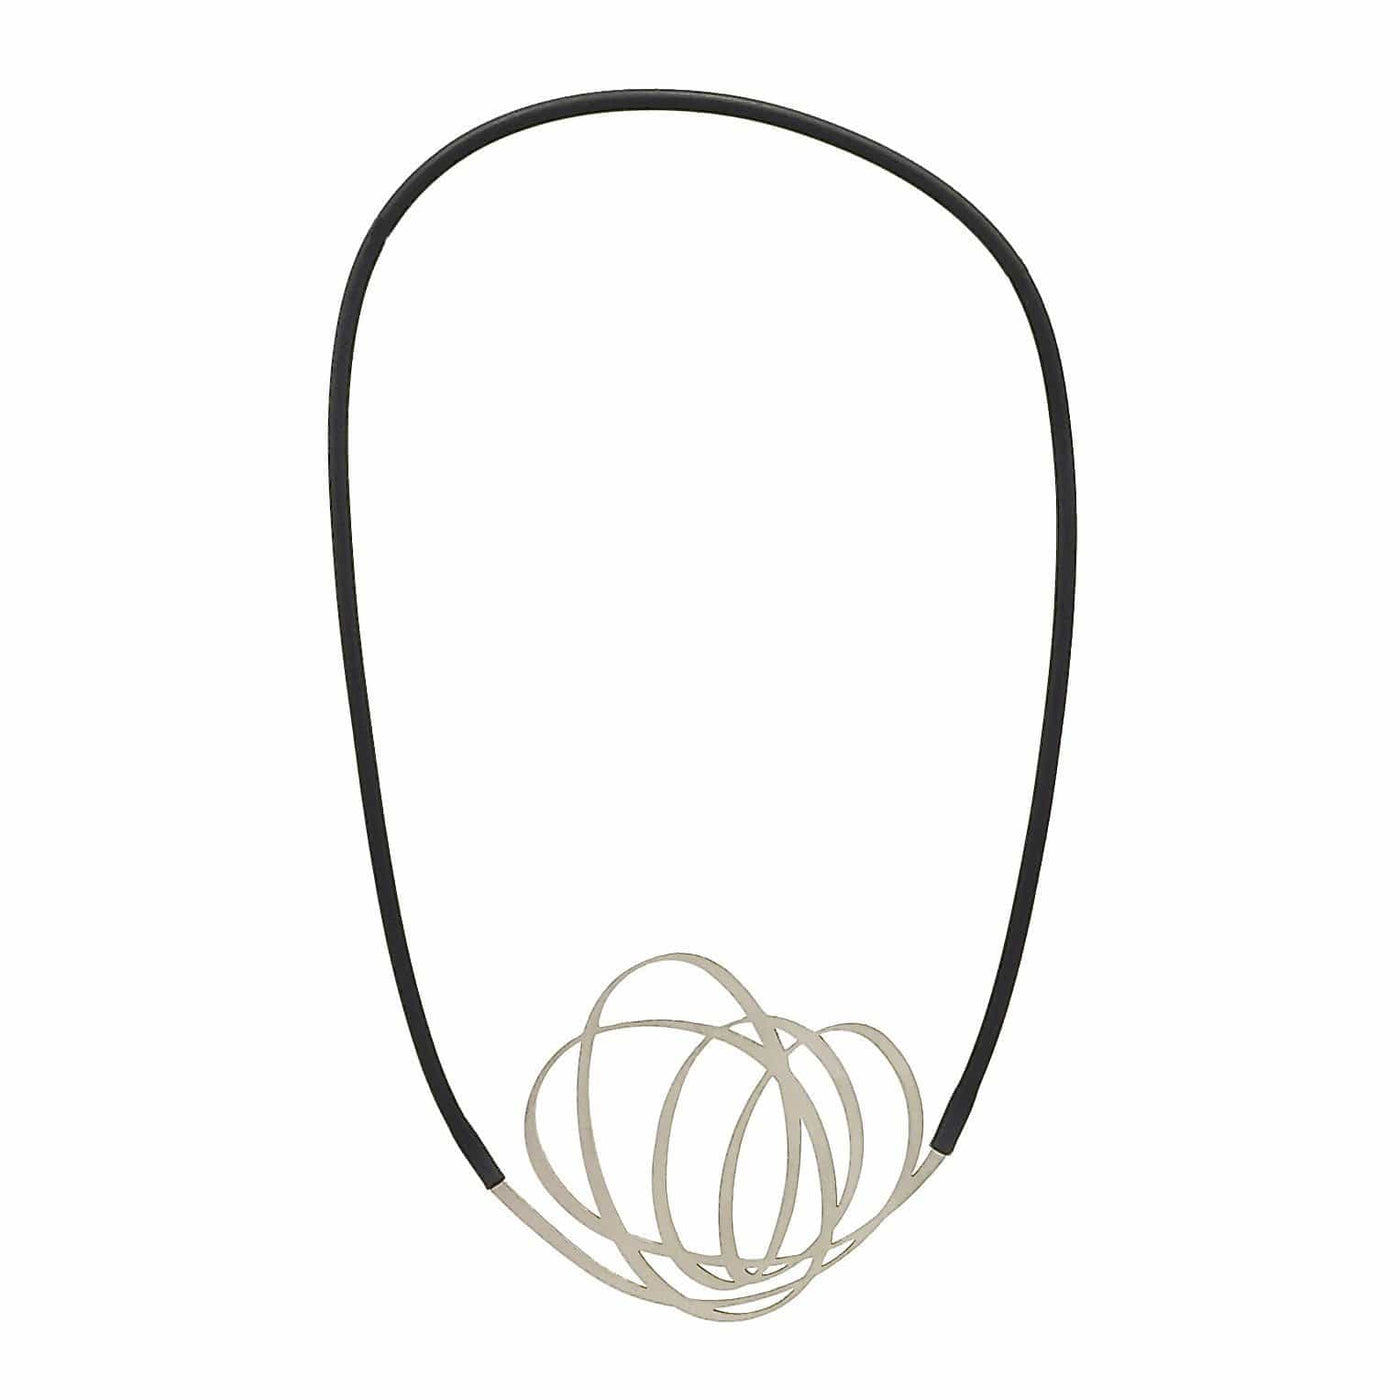 Whirl Necklace - Black - inSync design